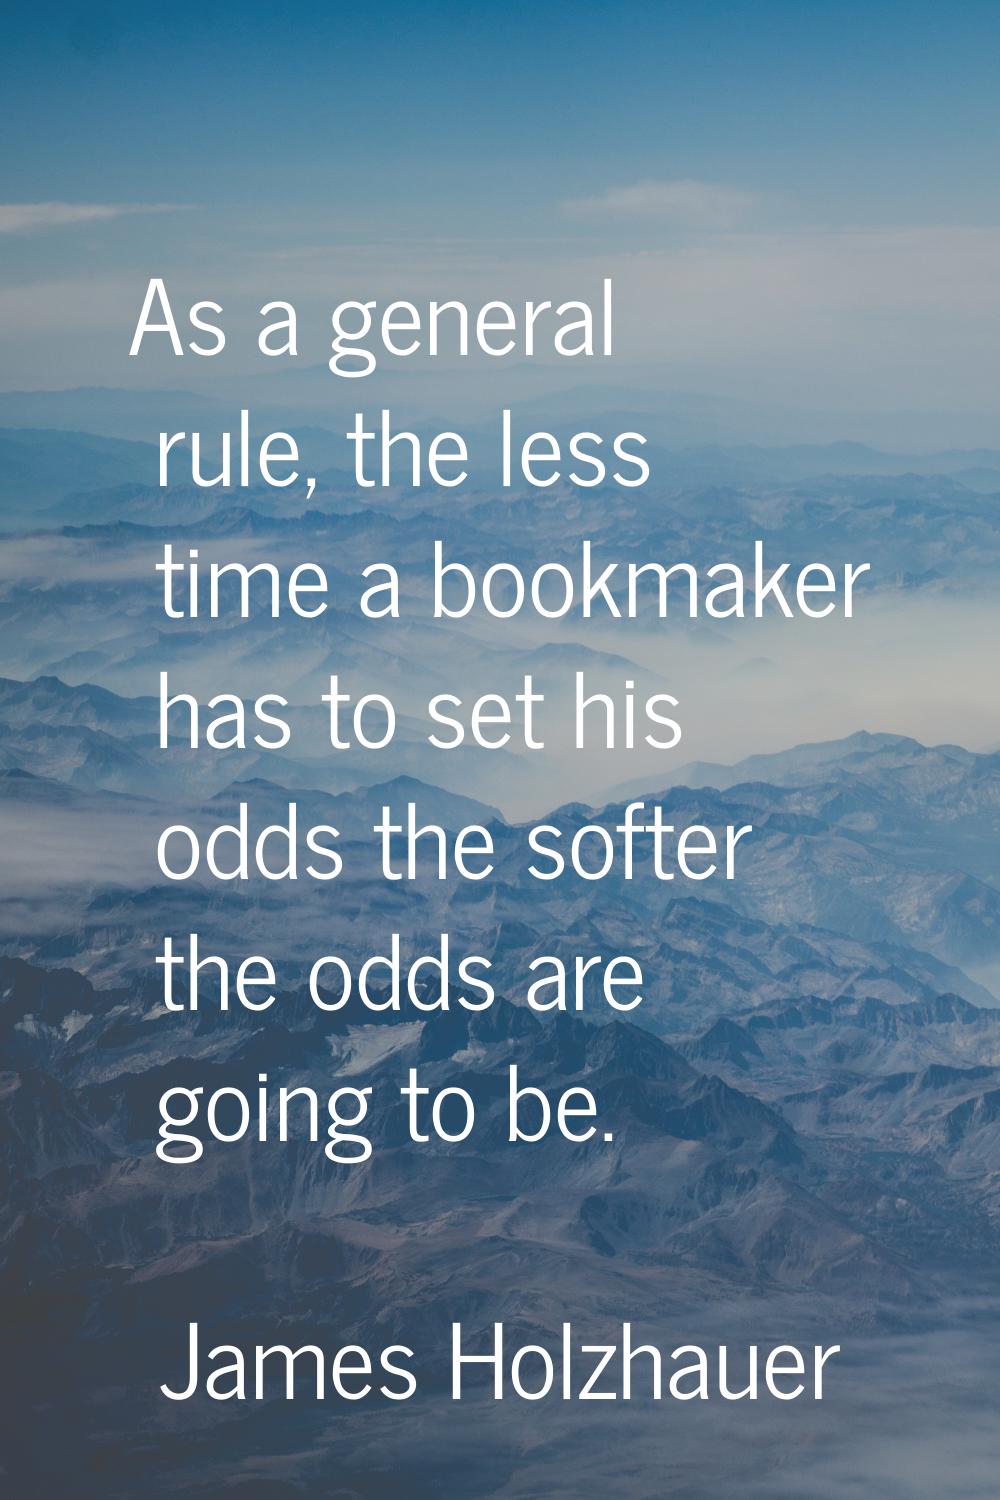 As a general rule, the less time a bookmaker has to set his odds the softer the odds are going to b